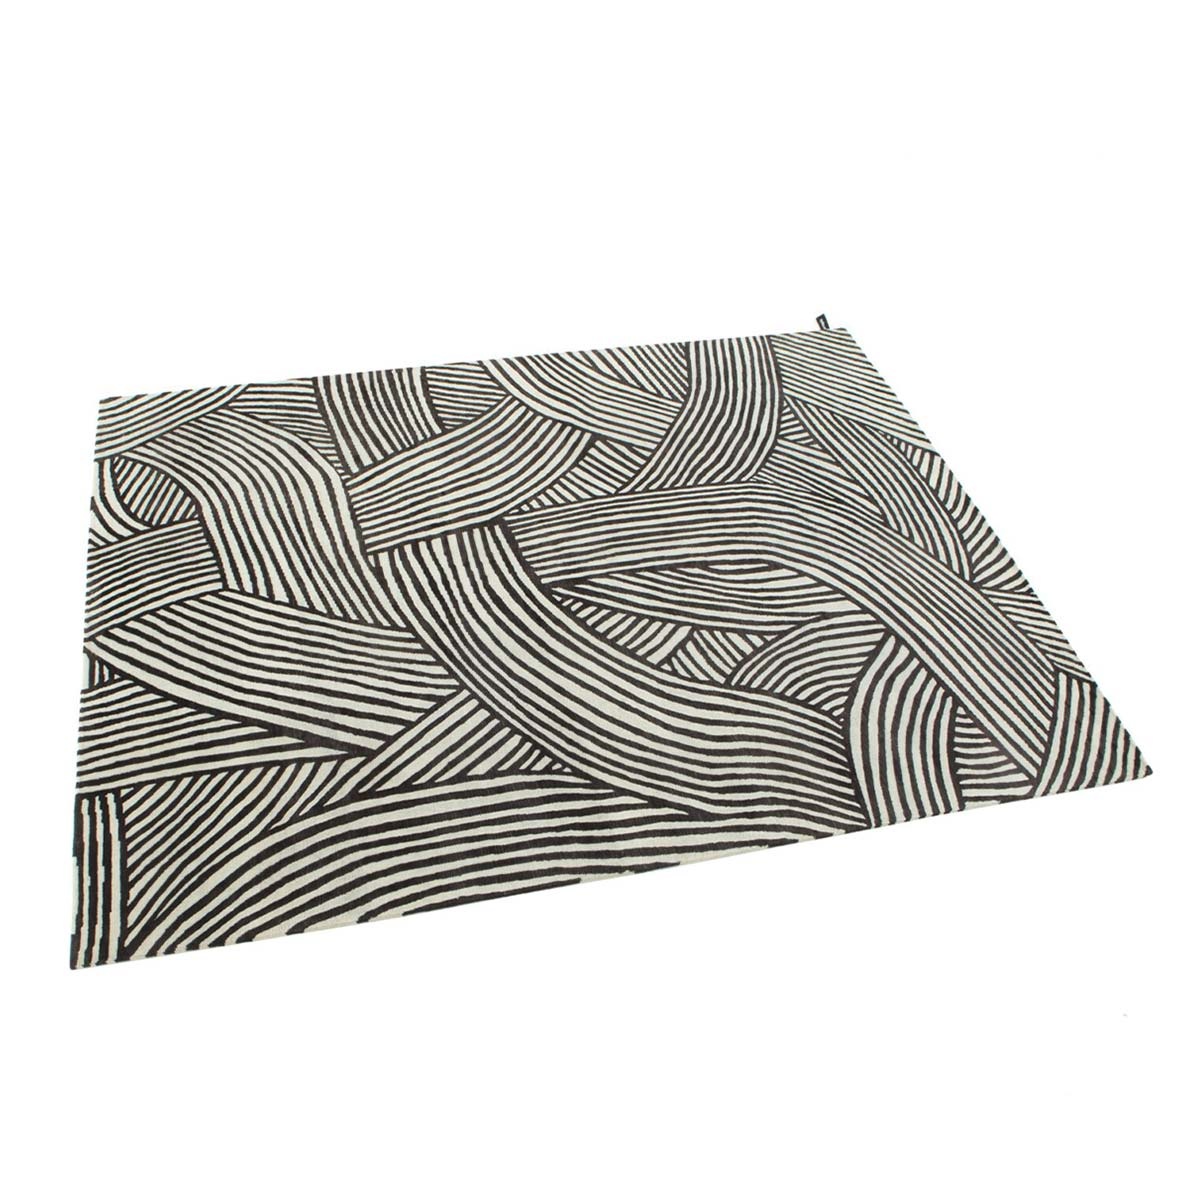 Inky Dhow Black Rug - Prevalent Projects